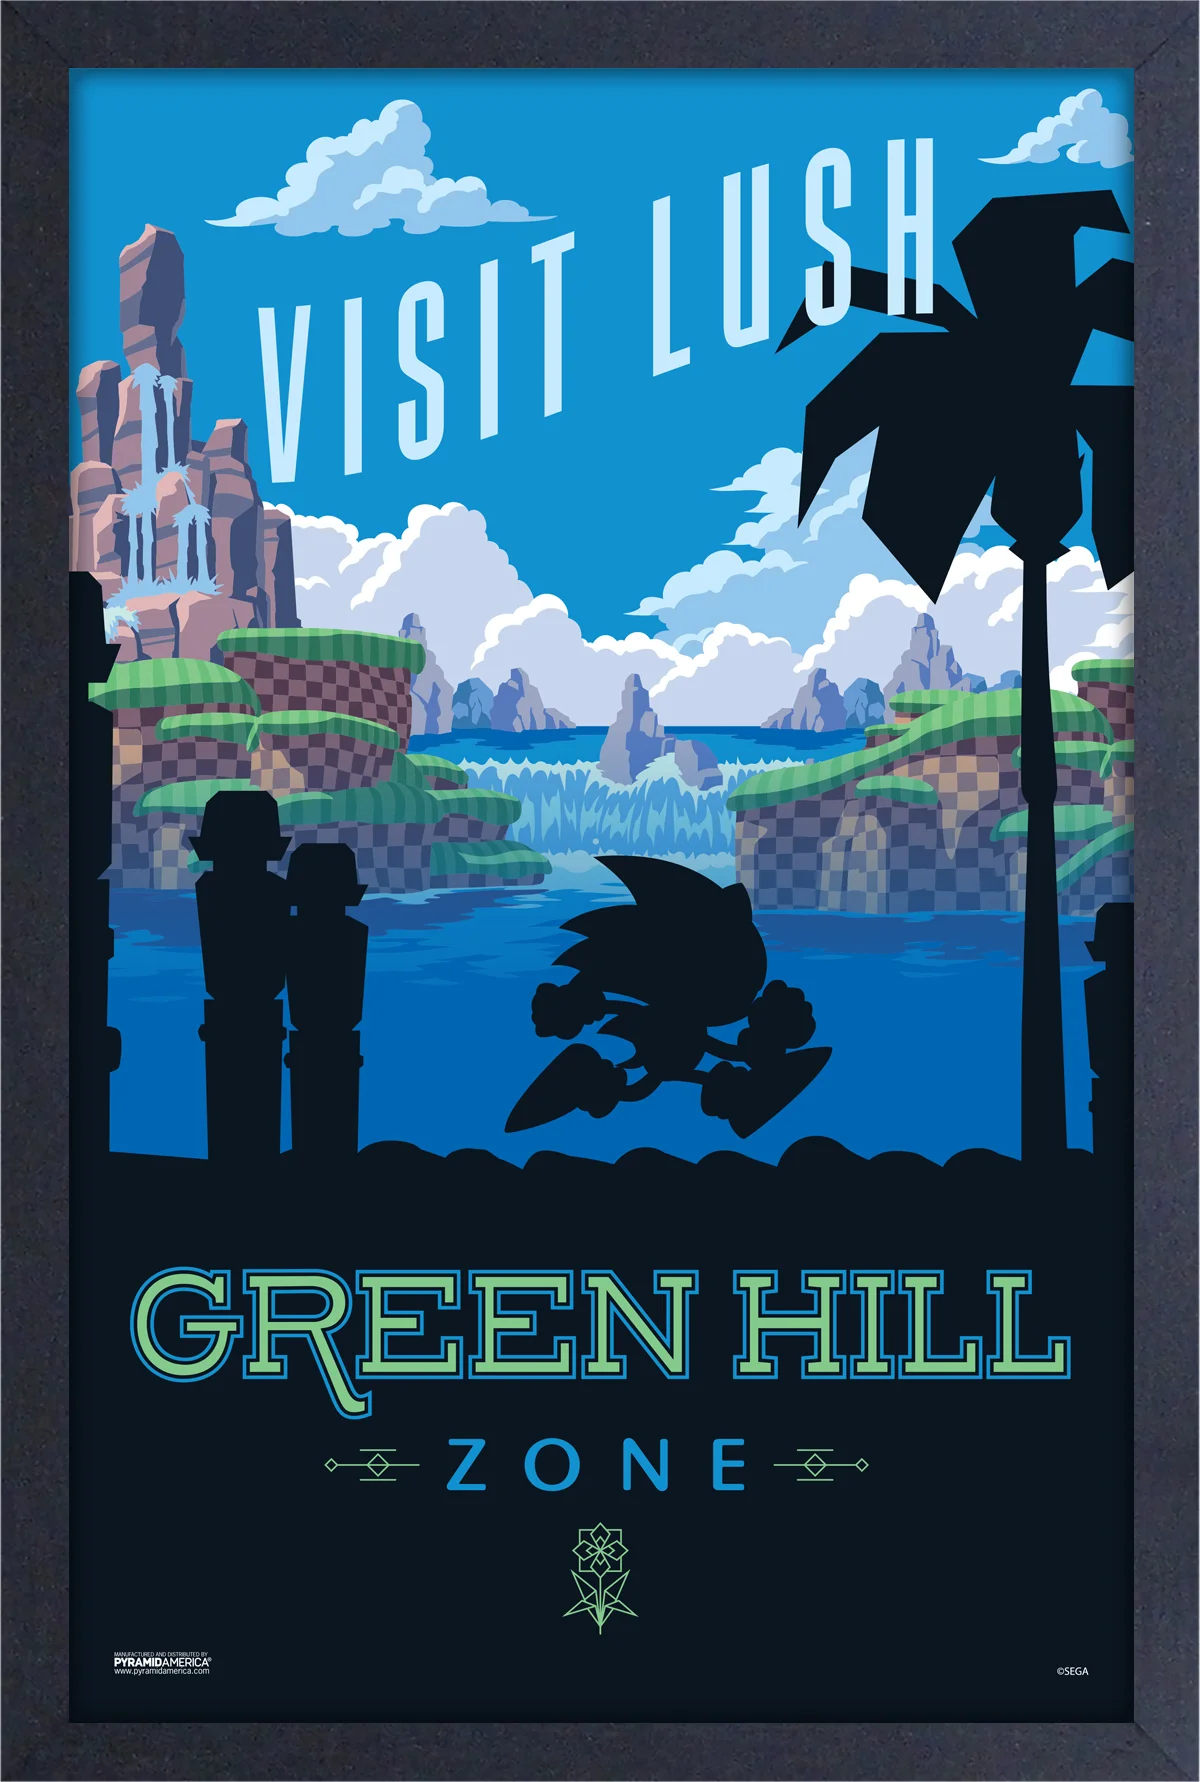 Sonic the Hedgehog - Visit Green Hill Zone (11"x17" Gel-Coat) (Order in multiples of 6, mix and match styles)